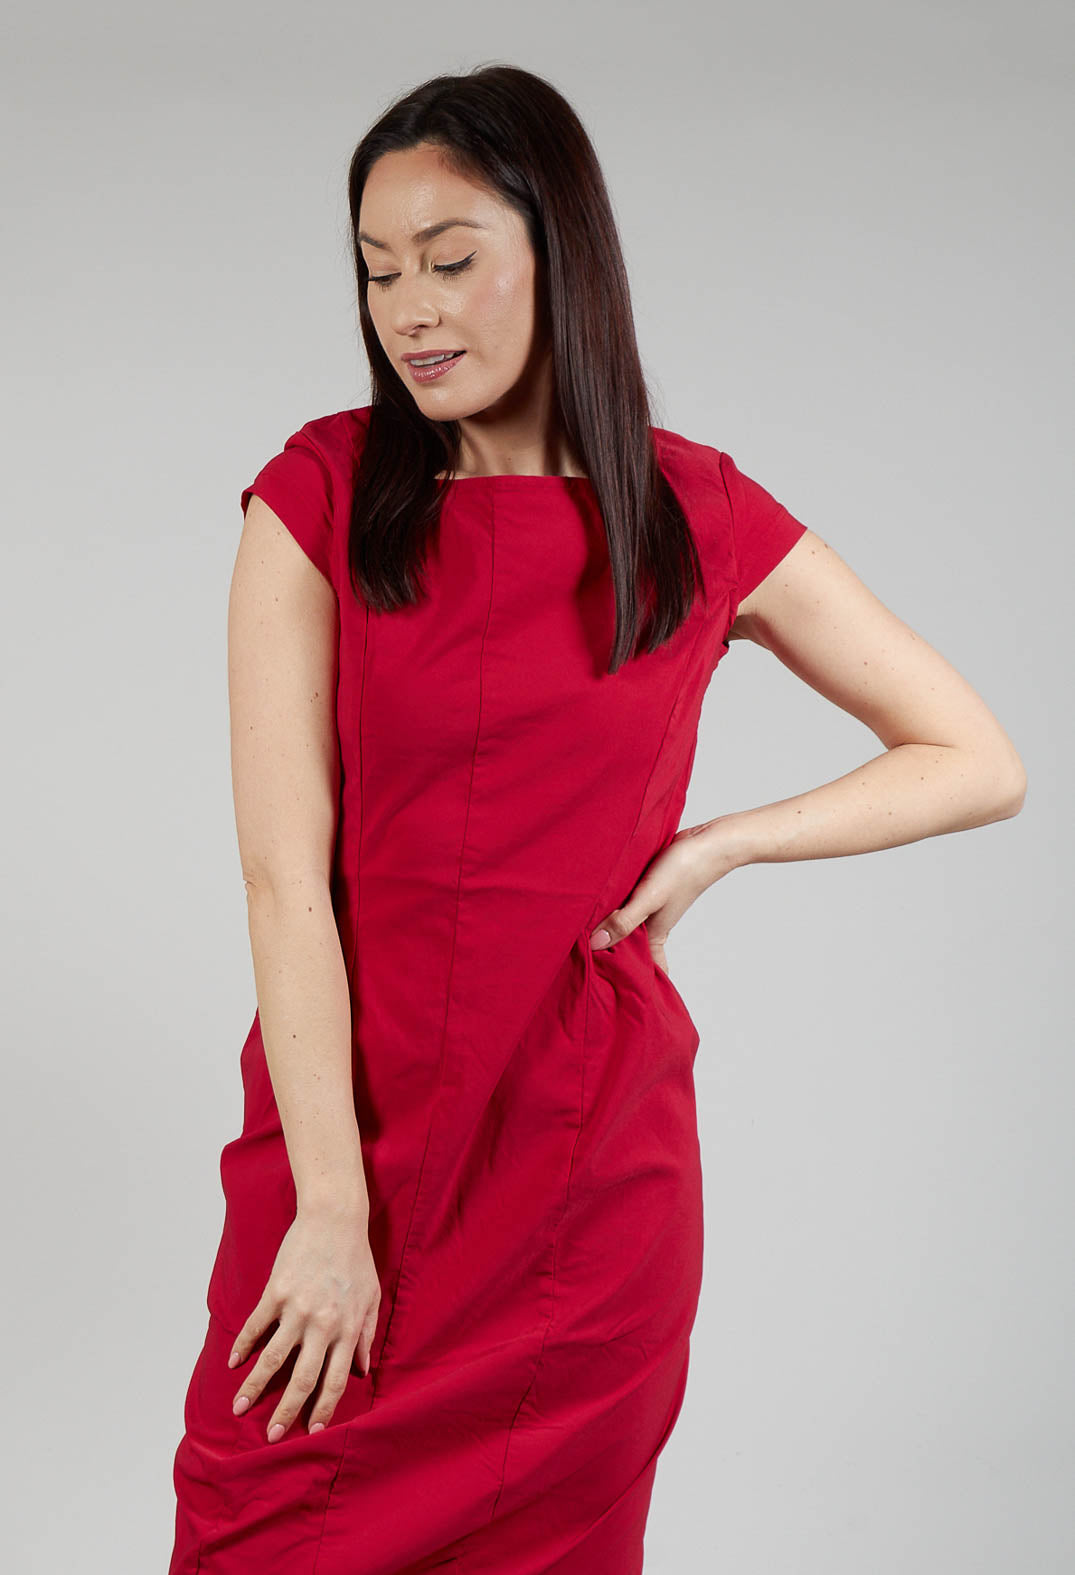 Capped Sleeve Slim Fit Dress in Chili